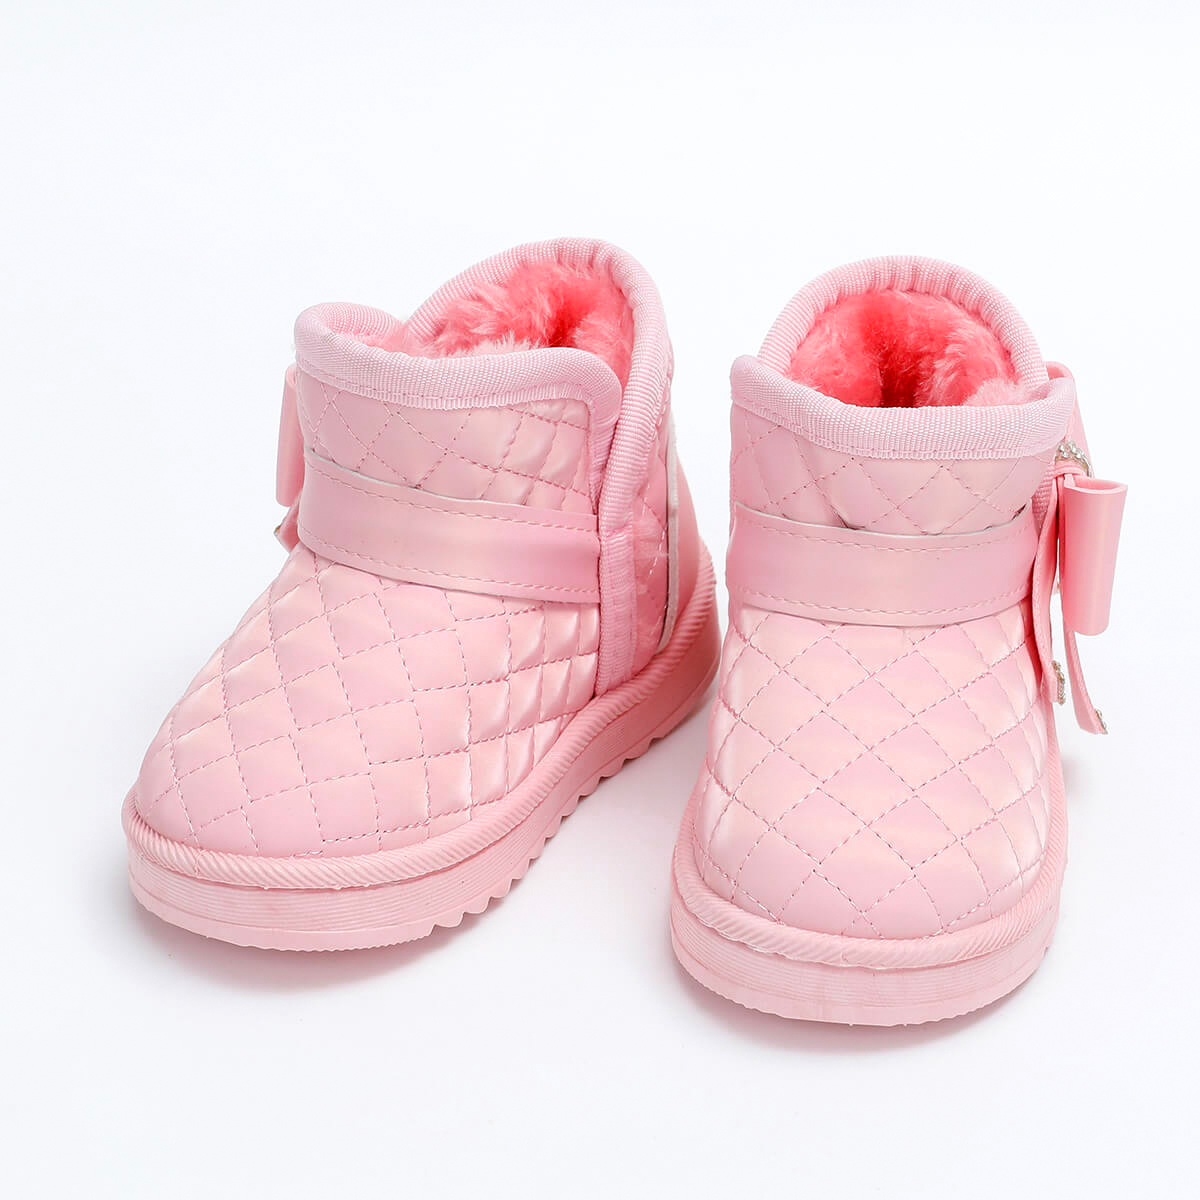 Riolio Toddler Girl Solid Color Bowknot Decor Water-proof Non-slip Snow BOOTS Wholesale